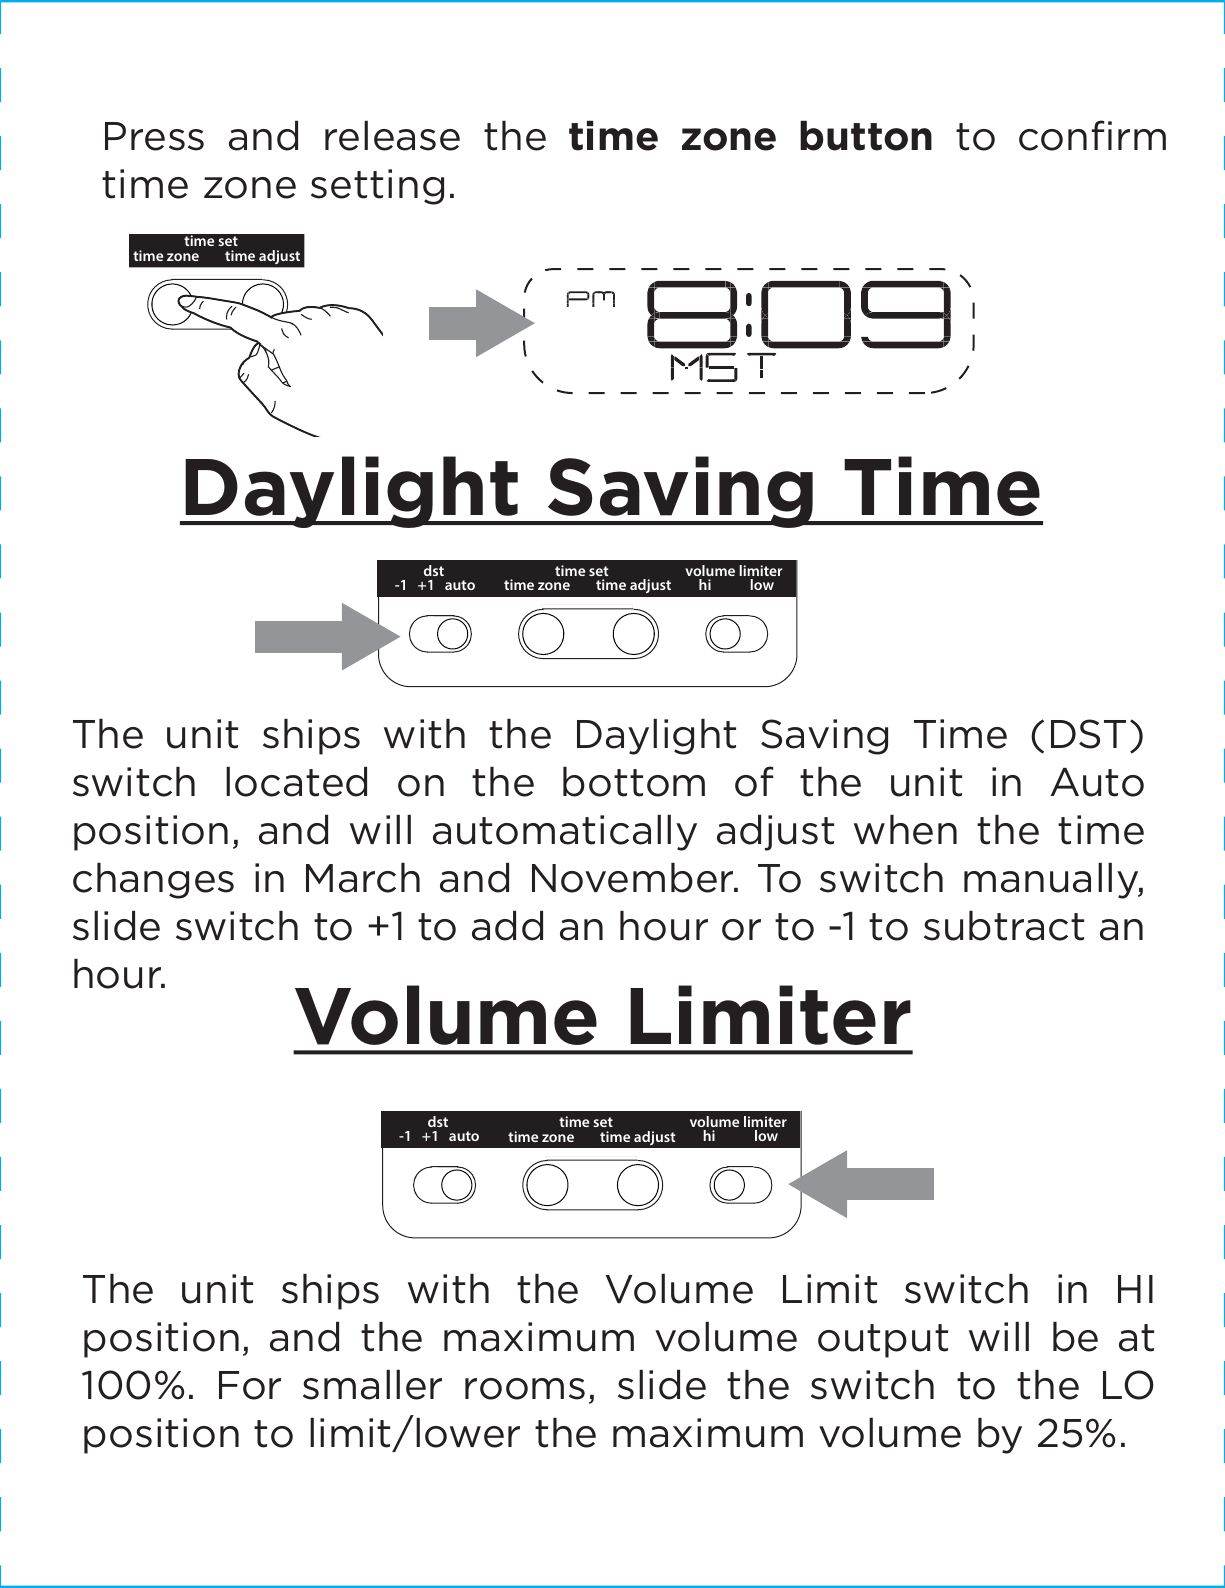 time adjusttime zonetime setDaylight Saving TimeThe unit ships with the Daylight Saving Time (DST) switch located on the bottom of the unit in Auto position, and will automatically adjust when the time  changes in March and November. To switch manually, slide switch to +1 to add an hour or to -1 to subtract an hour. Volume LimiterThe unit ships with the Volume Limit switch in HI position, and the maximum volume output will be at 100%. For smaller rooms, slide the switch to the LO position to limit/lower the maximum volume by 25%.Press and release the time zone button to conﬁrm time zone setting.dst time adjusttime zonetime set-1   +1   auto volume limiterhi            lowdst time adjusttime zonetime set-1   +1   auto volume limiterhi            low